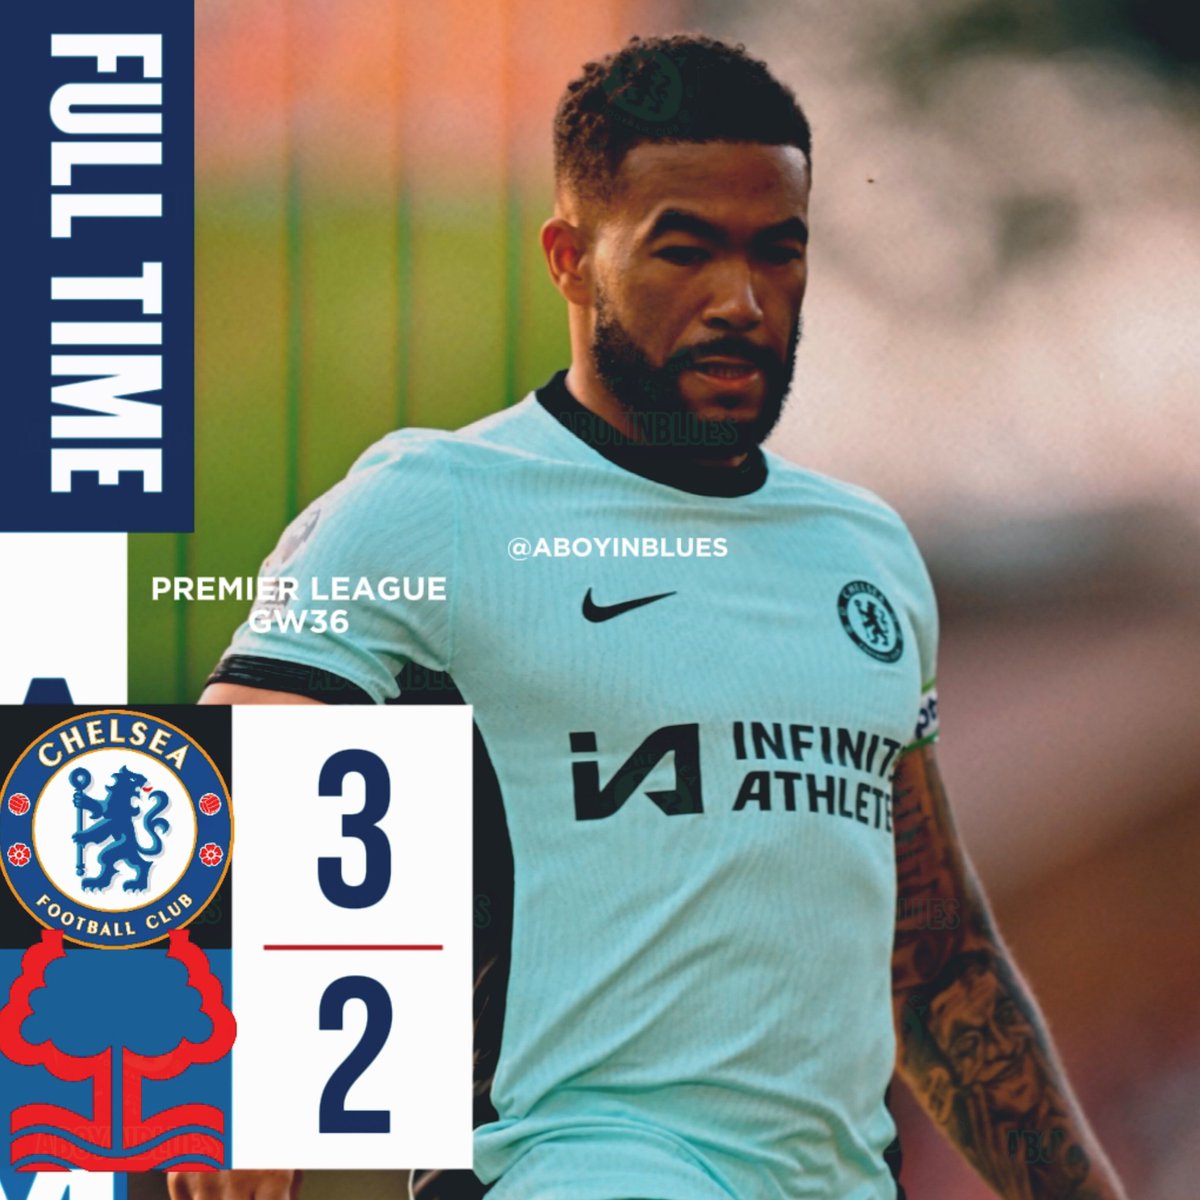 🚨 FT: Nottingham Forest 2-3 Chelsea

What a win!!!!!! Up the Chels! We were dogsh*t for most of the game, but we still march on! 

#CFC #chelsea #chelseafc #cfc #cfcfamily #cfcindo #chelseafans #londonisblue #chelseaboots #chelseafootballclub #notche